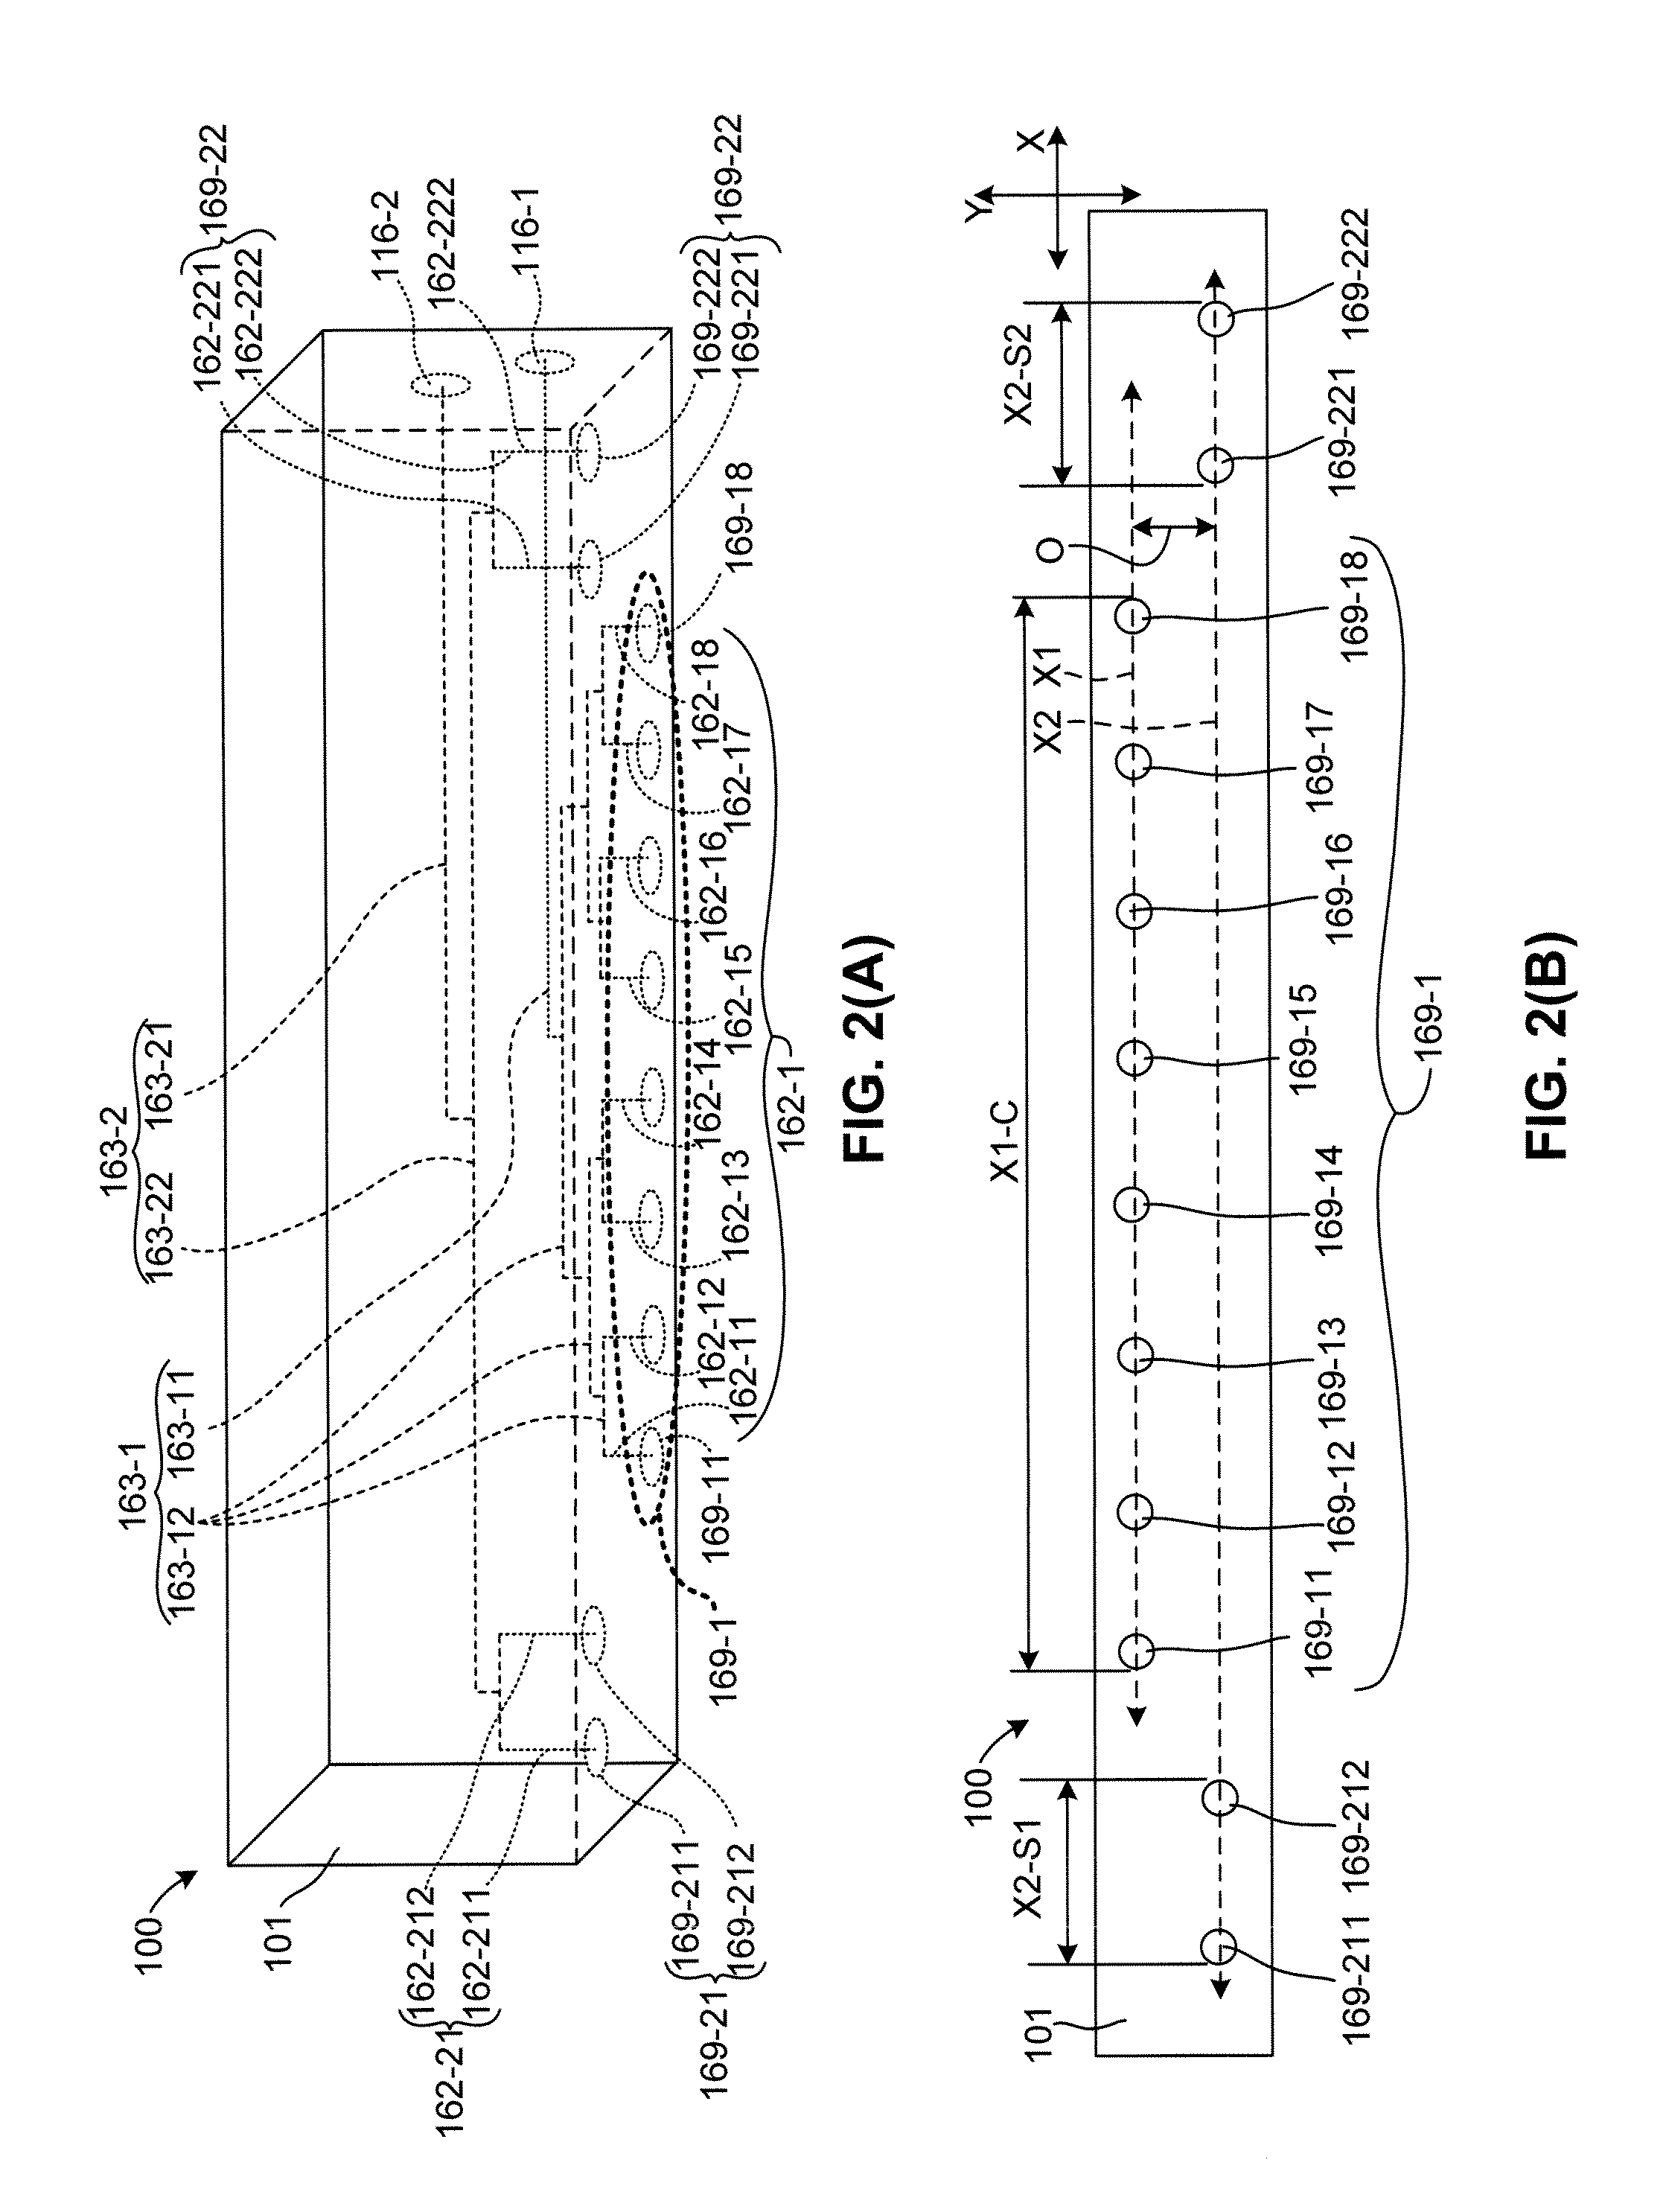 Micro-Extrusion Printhead With Offset Orifices For Generating Gridlines On Non-Square Substrates